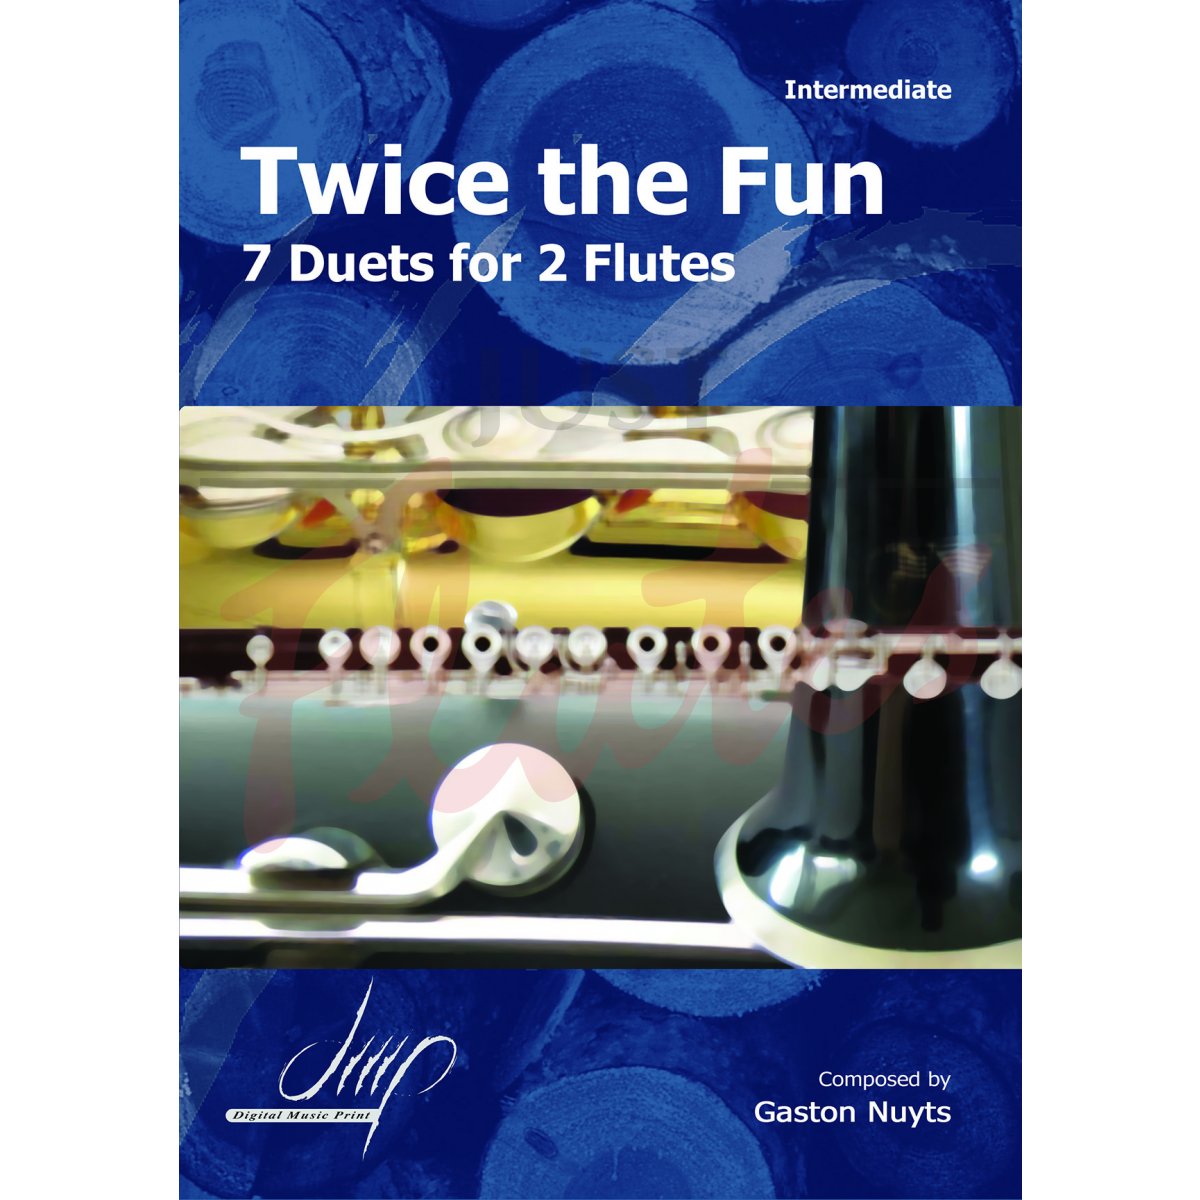 Twice the Fun for 2 flutes